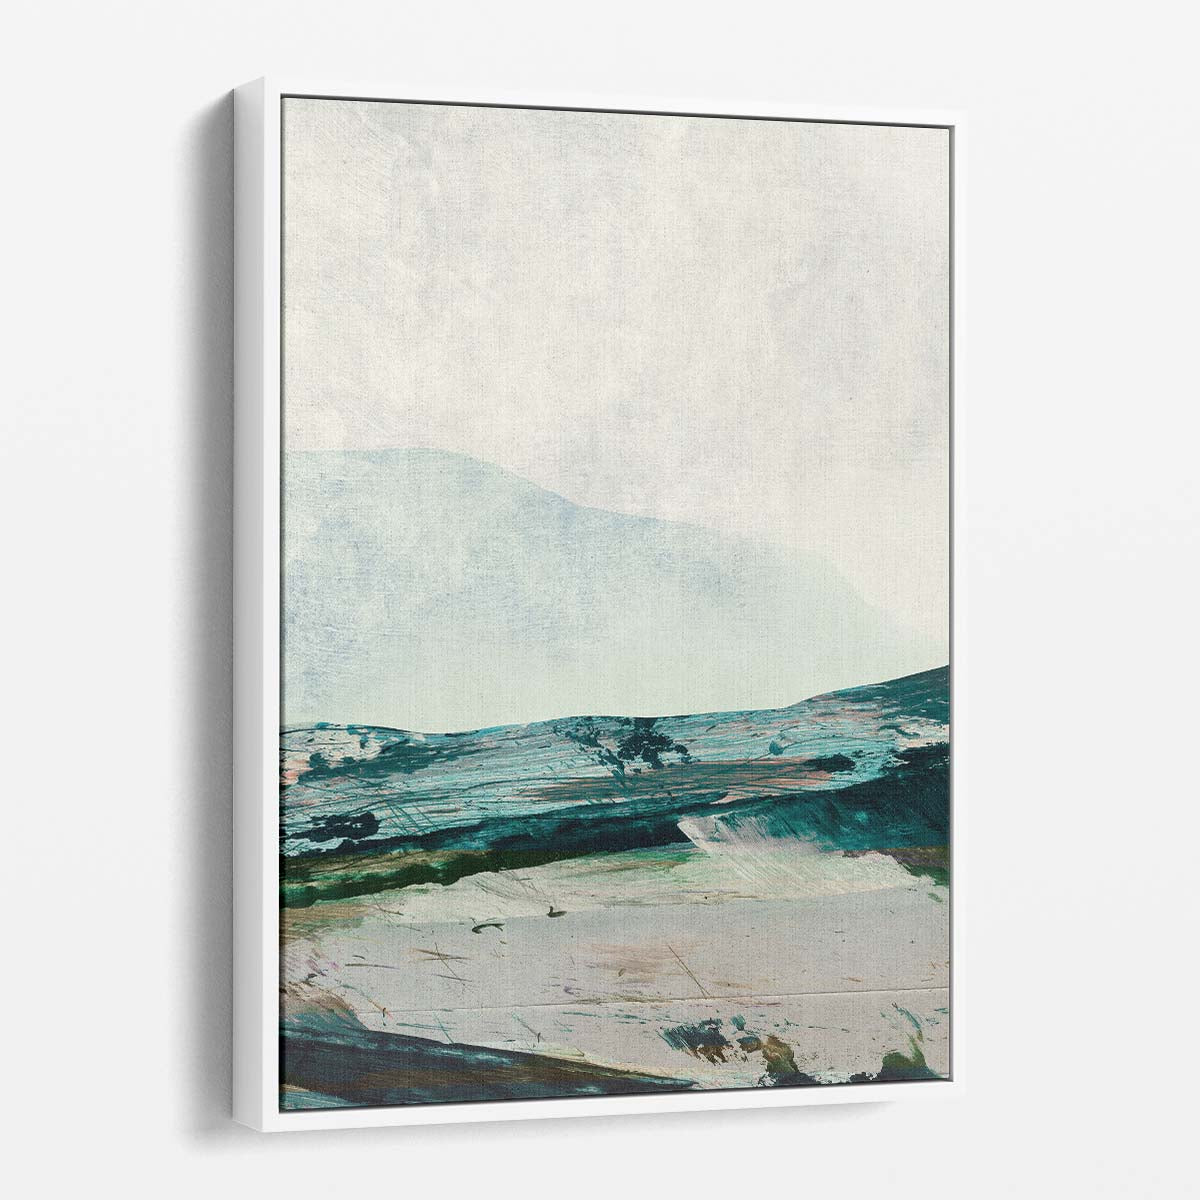 Dan Hobday's Modern Green Mountains Abstract Illustration Art by Luxuriance Designs, made in USA